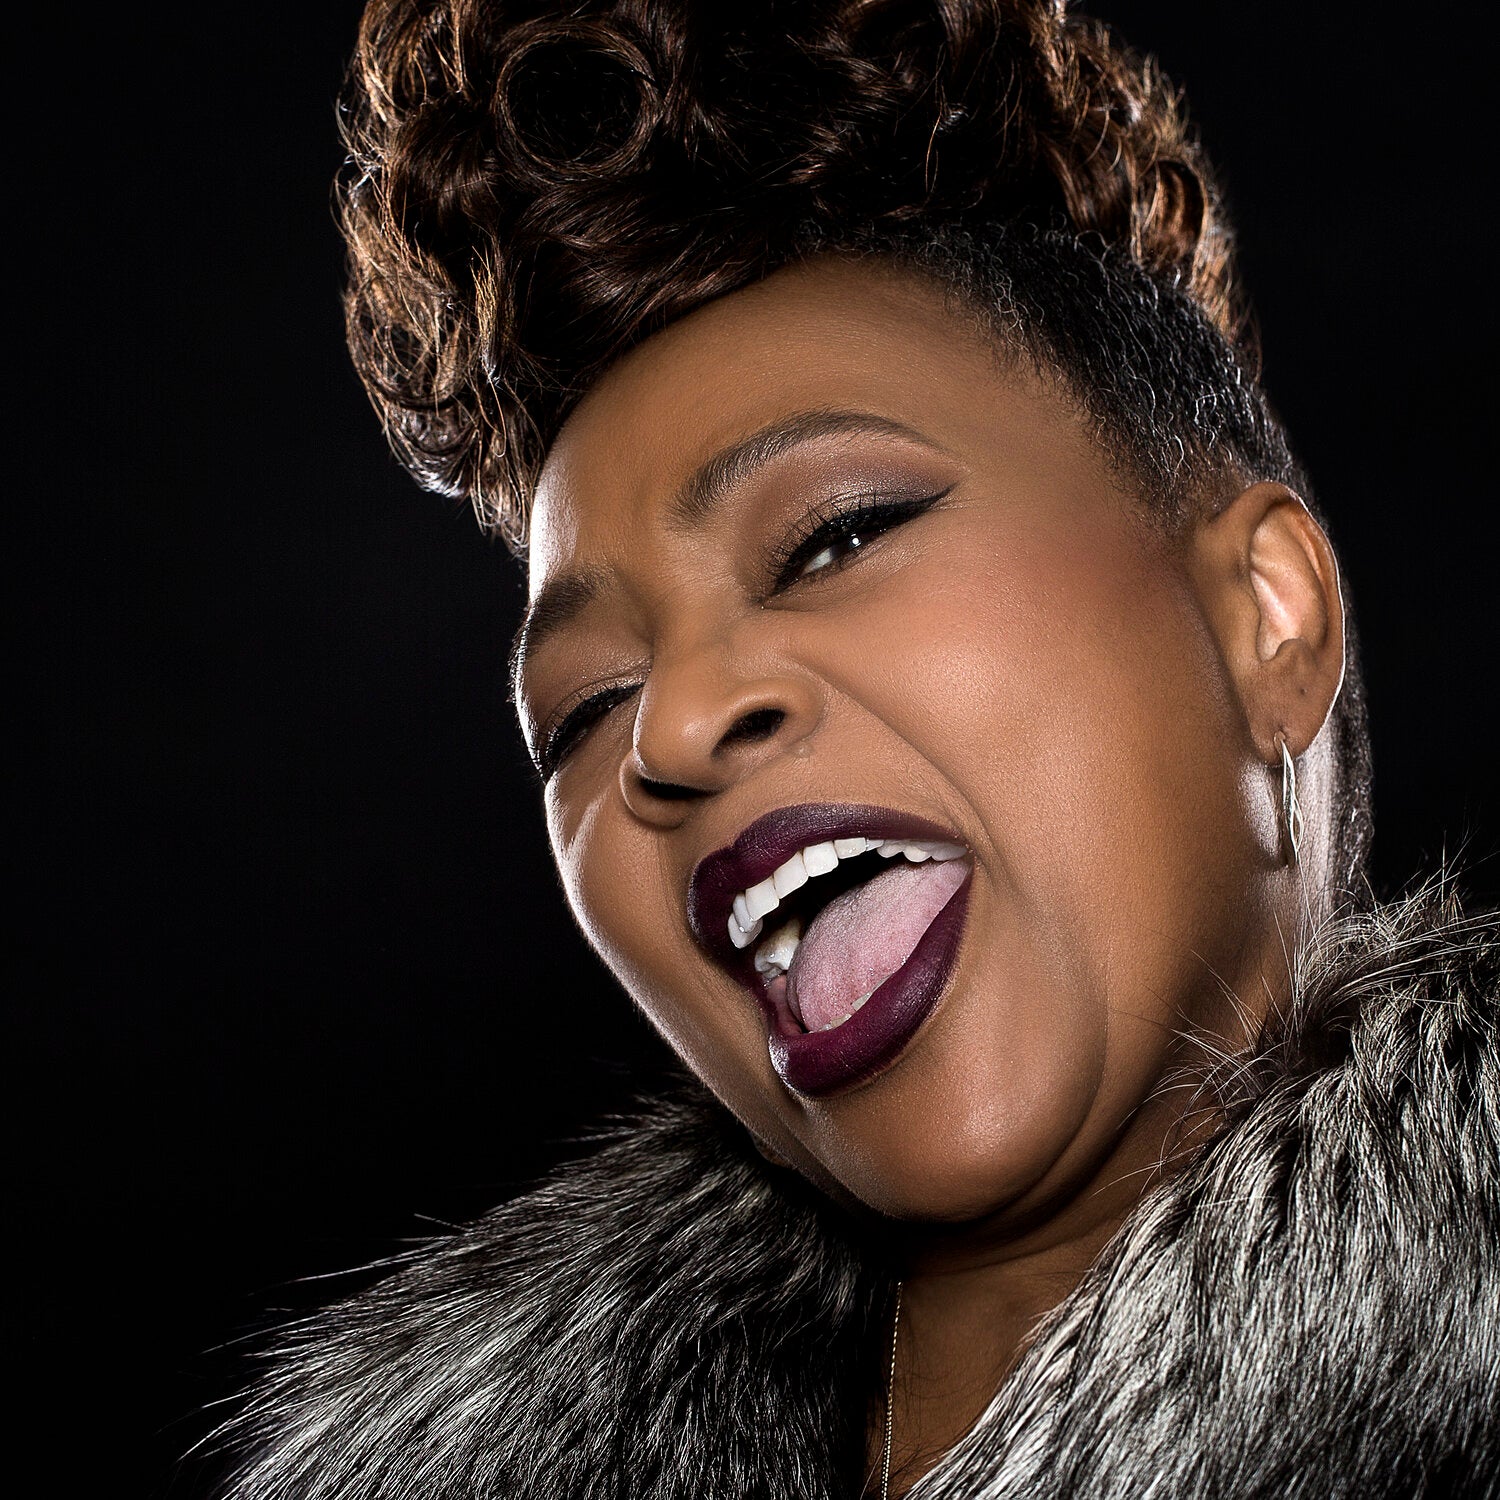 Jocelyn Brown has more than twenty hits on the Hot Dance Music/Club Play chart. She continues to record house music and have chart hits in the 21st century